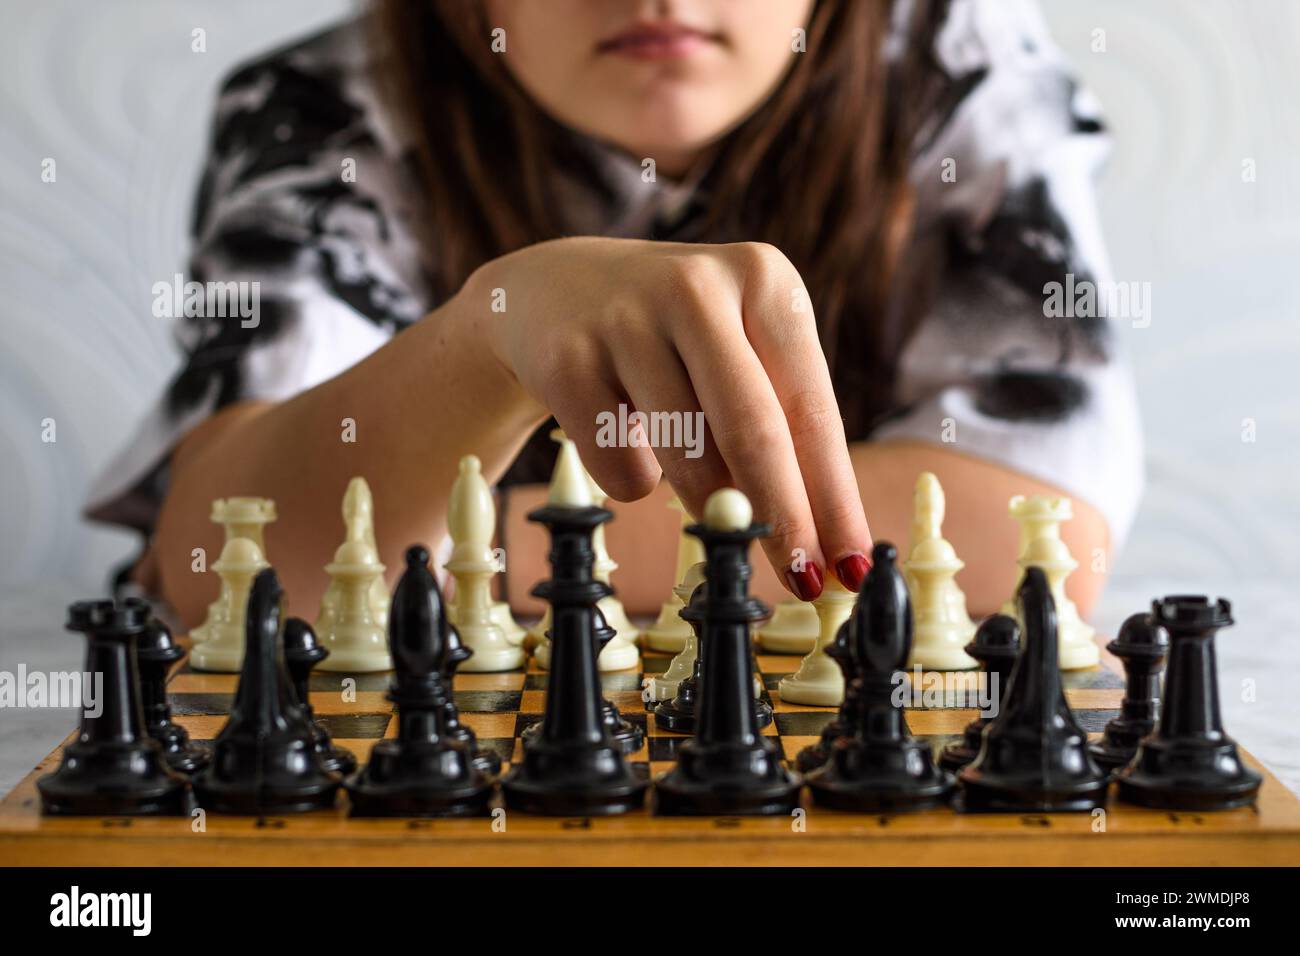 Young lady woman playing chess Stock Photo